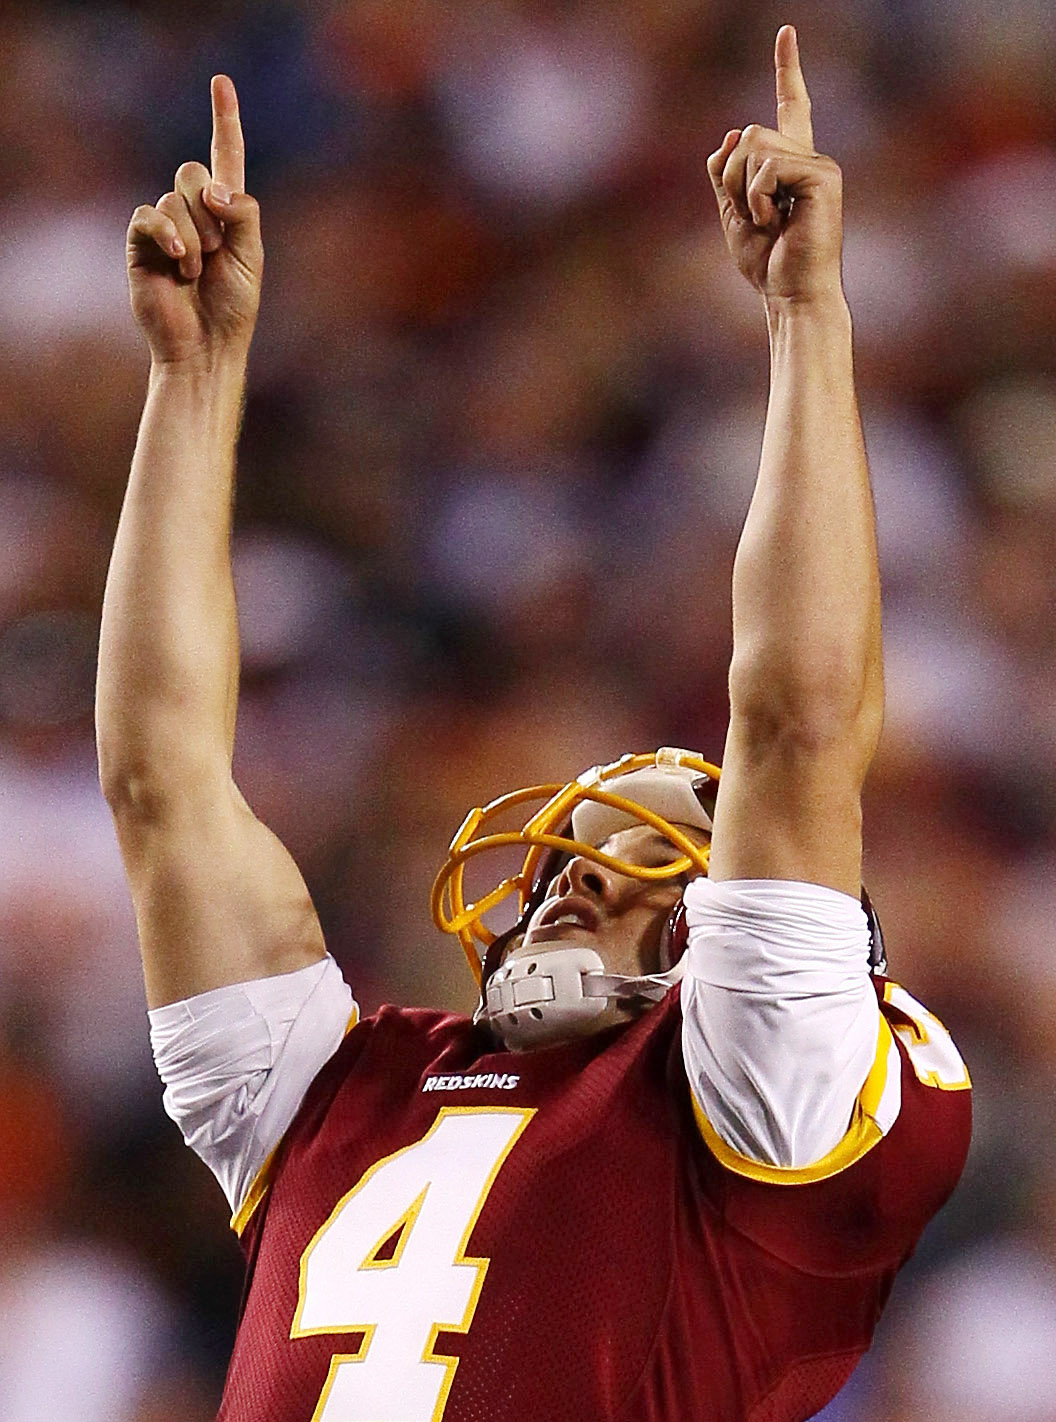 LANDOVER, MD - OCTOBER 17:  Washington Redskins kicker Graham Gano #4 celebrates making a field goal against the Indianapolis Colts at FedEx Field on October 17, 2010 in Landover, Maryland. The Colts won the game 27-24.  (Photo by Win McNamee/Getty Images